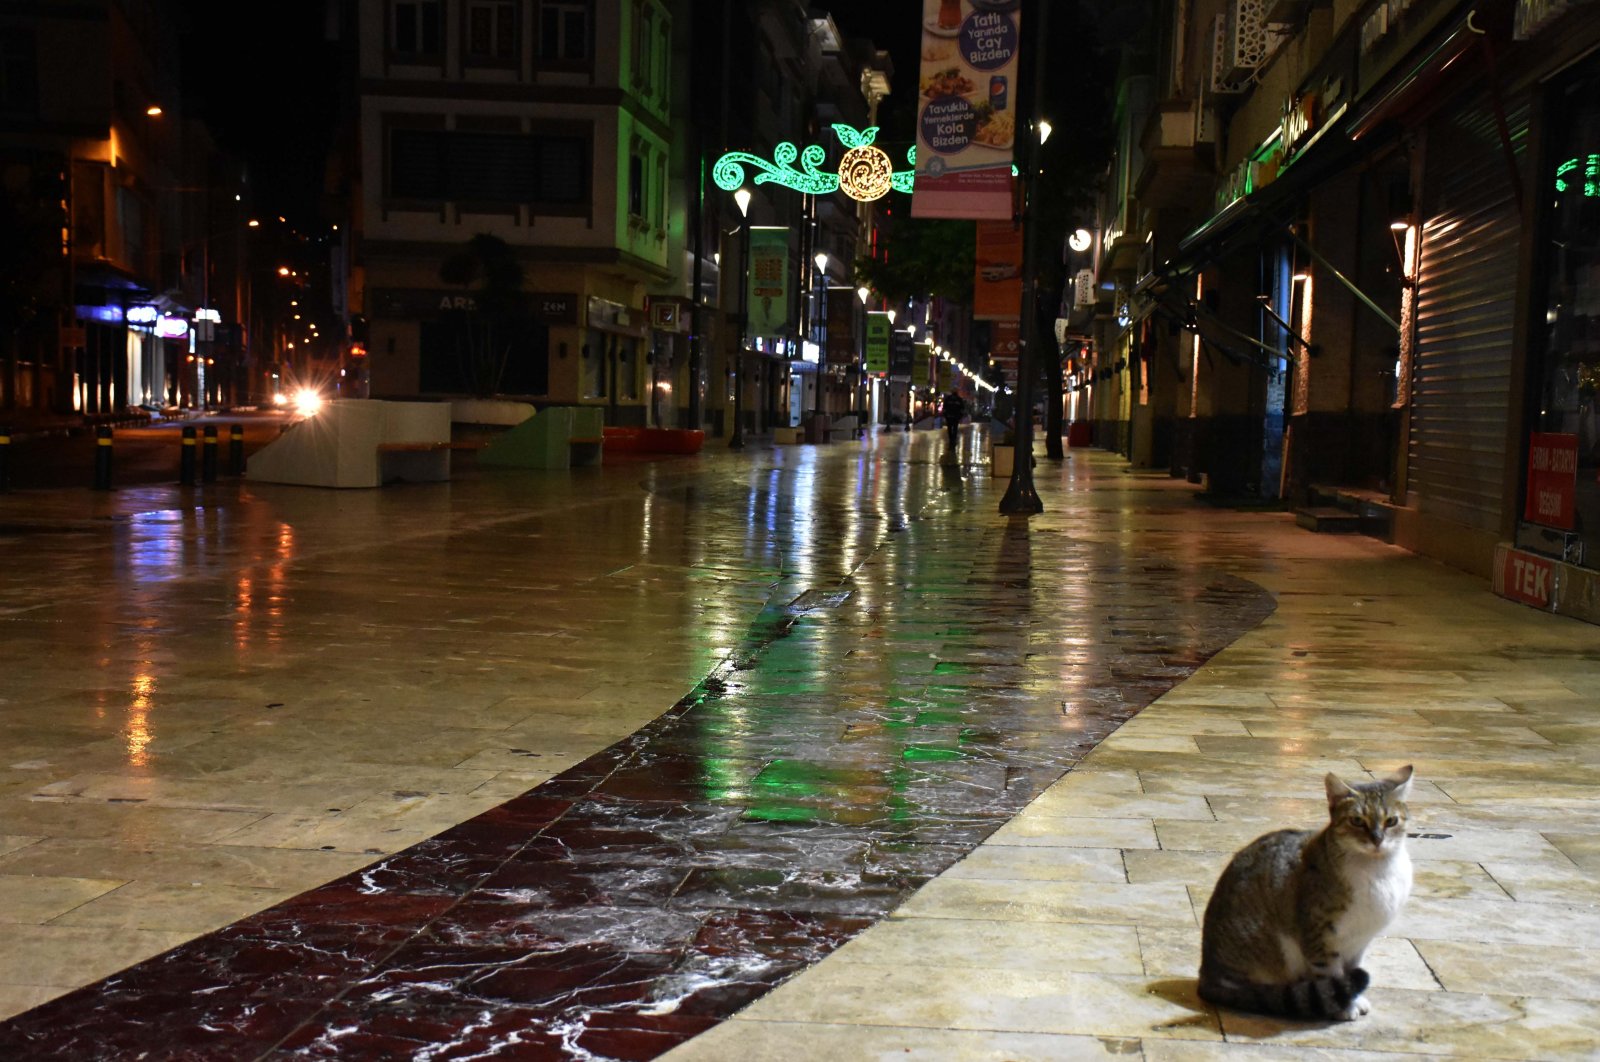 A cat sits on an otherwise busy street during the curfew in Ordu, northern Turkey, Nov. 21, 2020. (AA Photo)